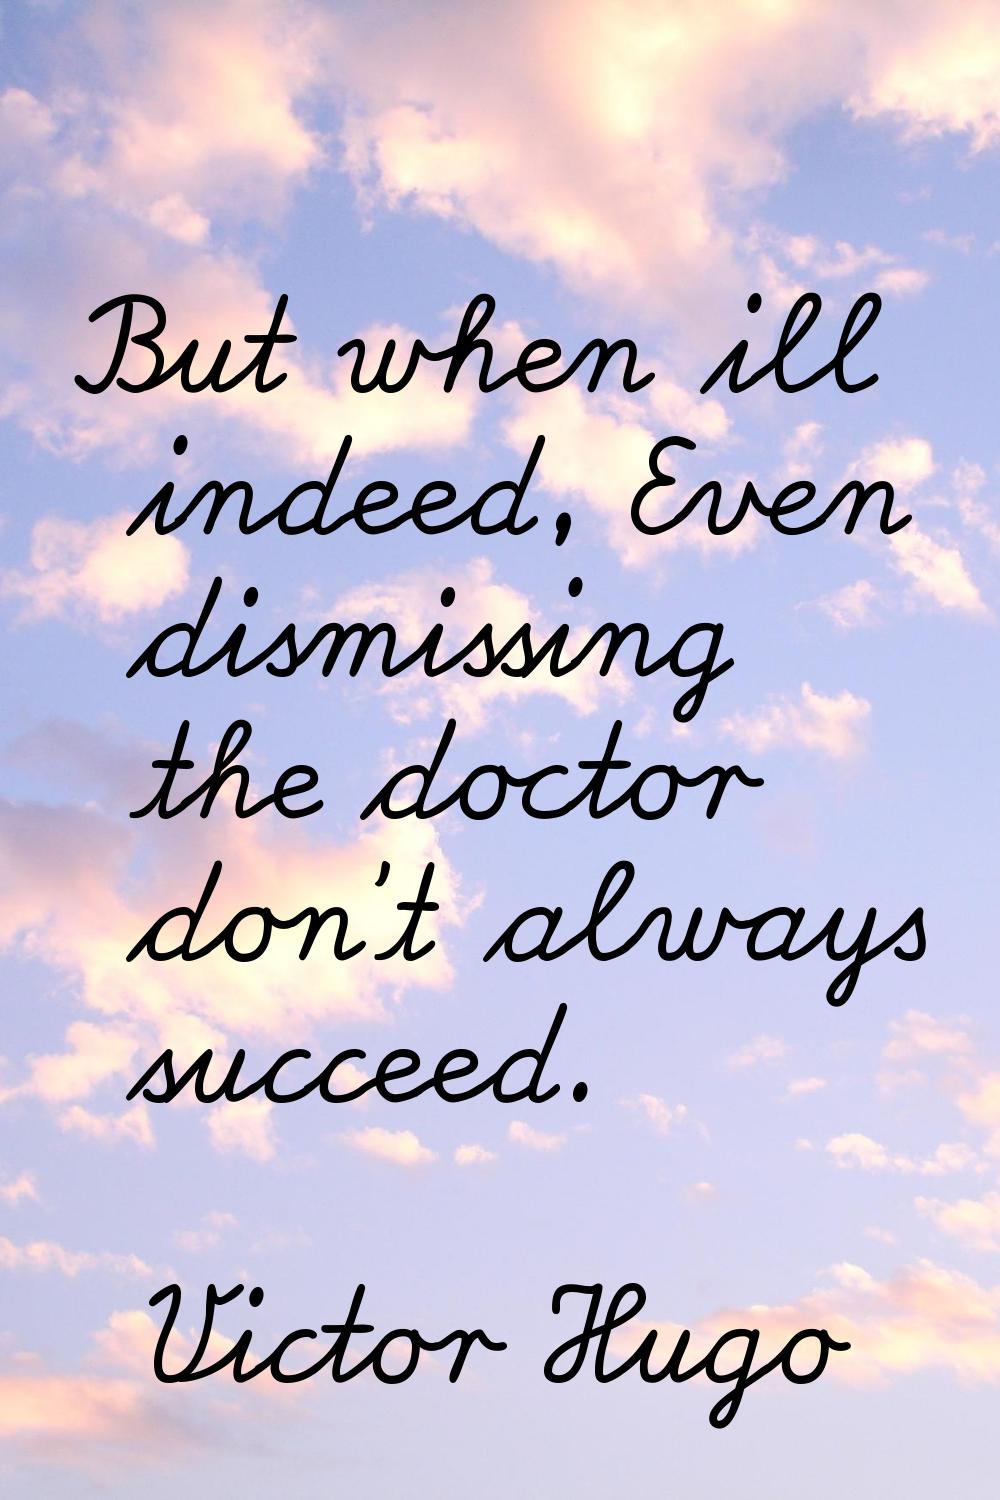 But when ill indeed, Even dismissing the doctor don't always succeed.